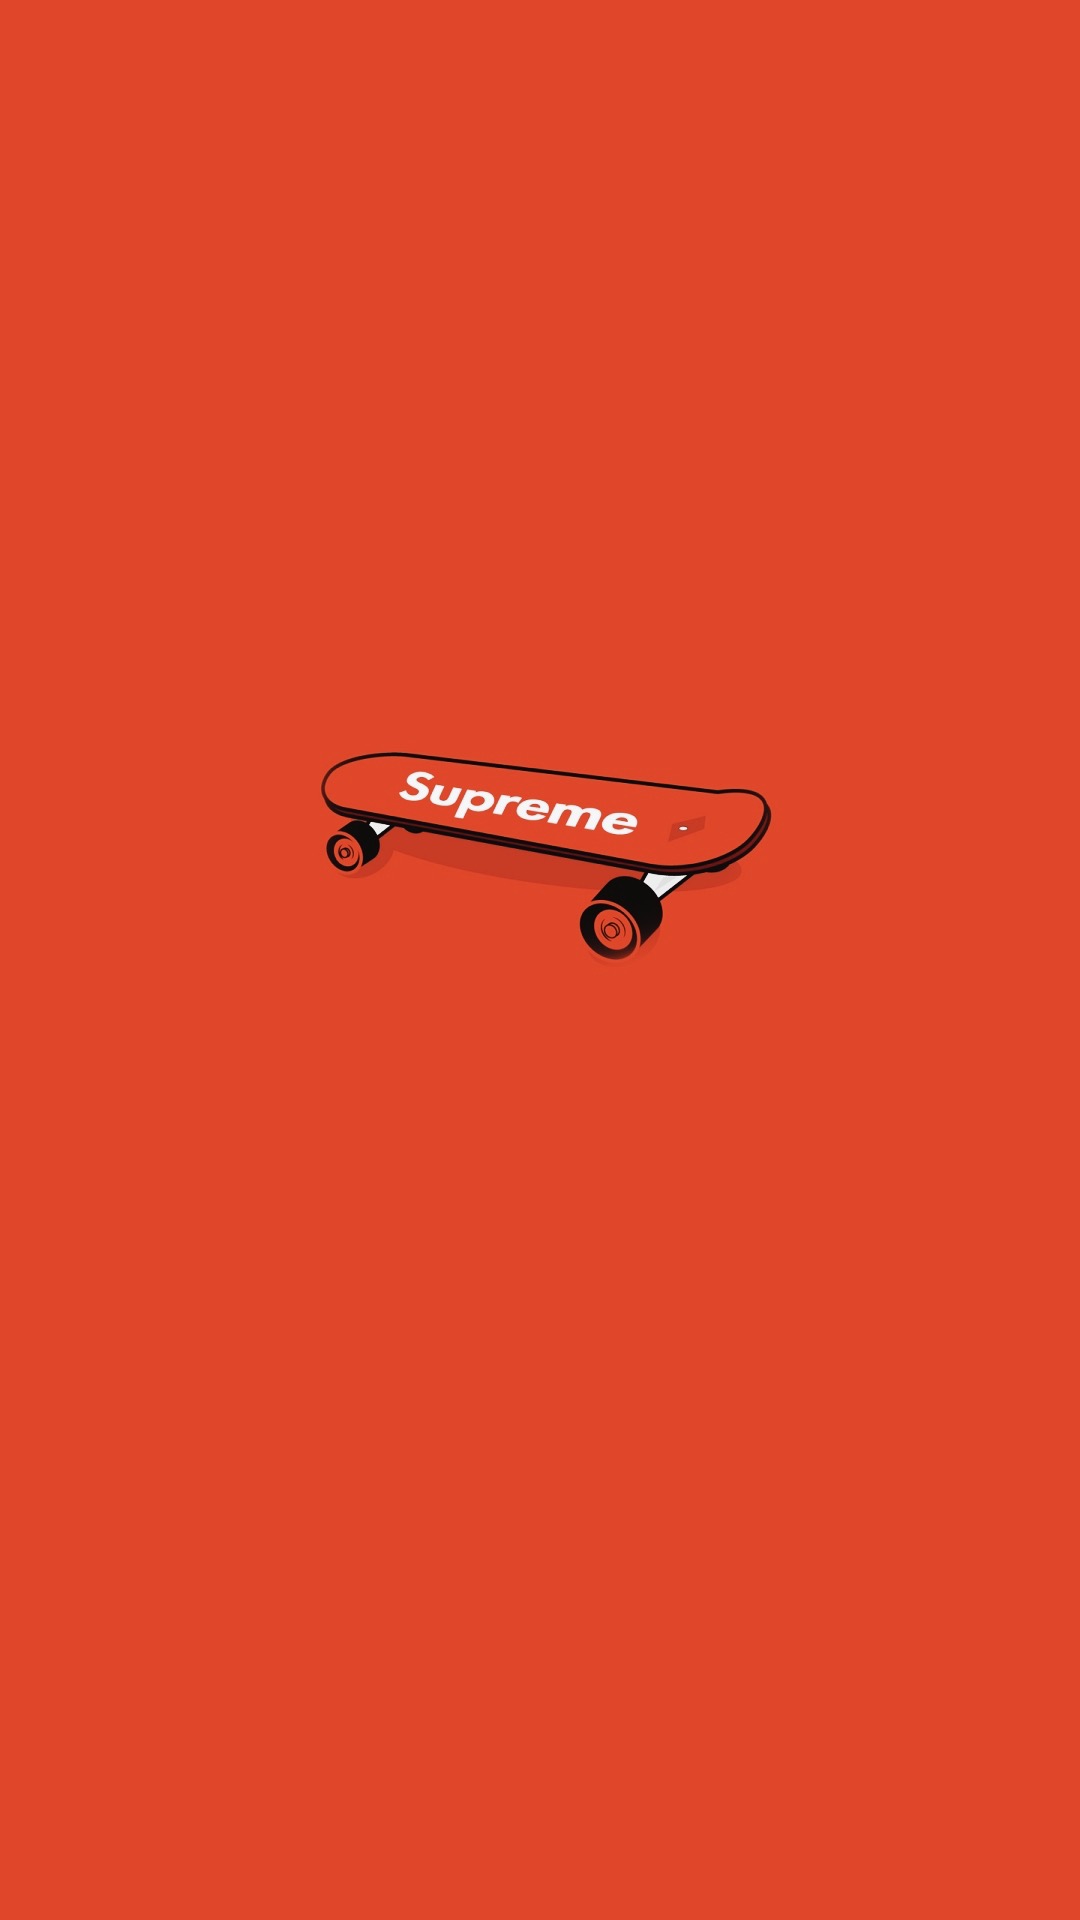 Supreme Profile Pictures Wallpapers